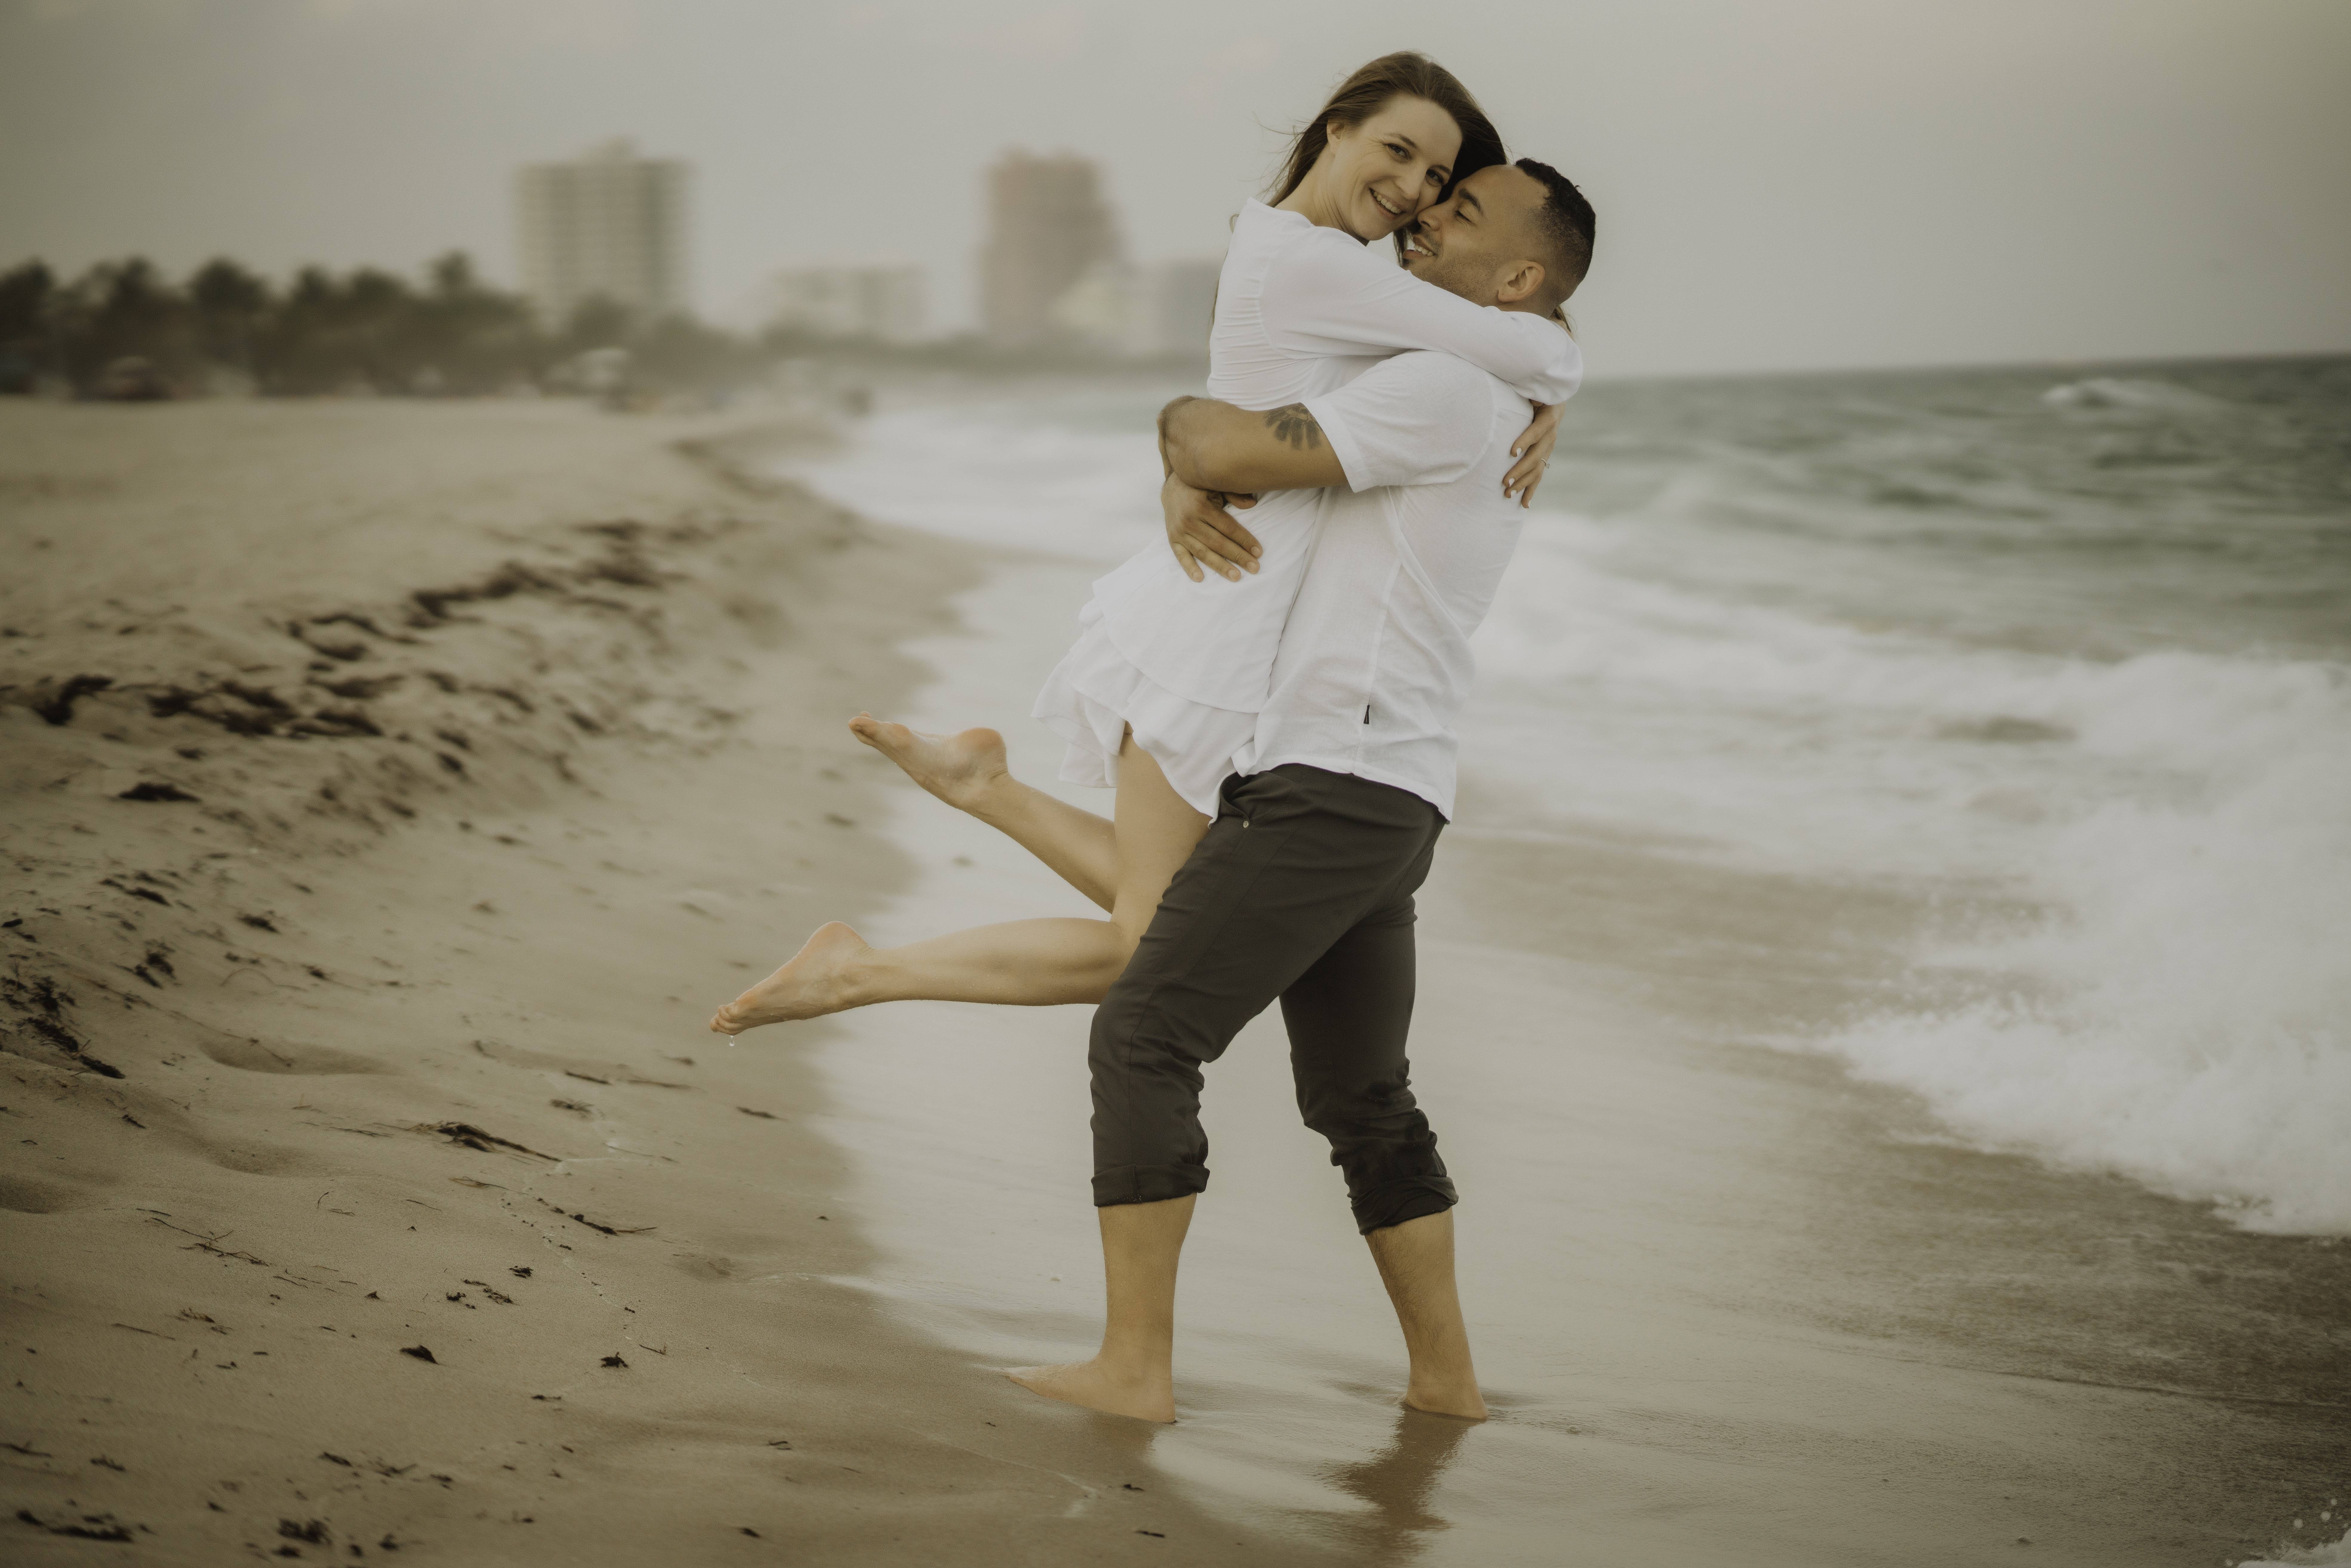 Samantha & Brandt's engagement session on the beach in Fort Lauderdale Florida.